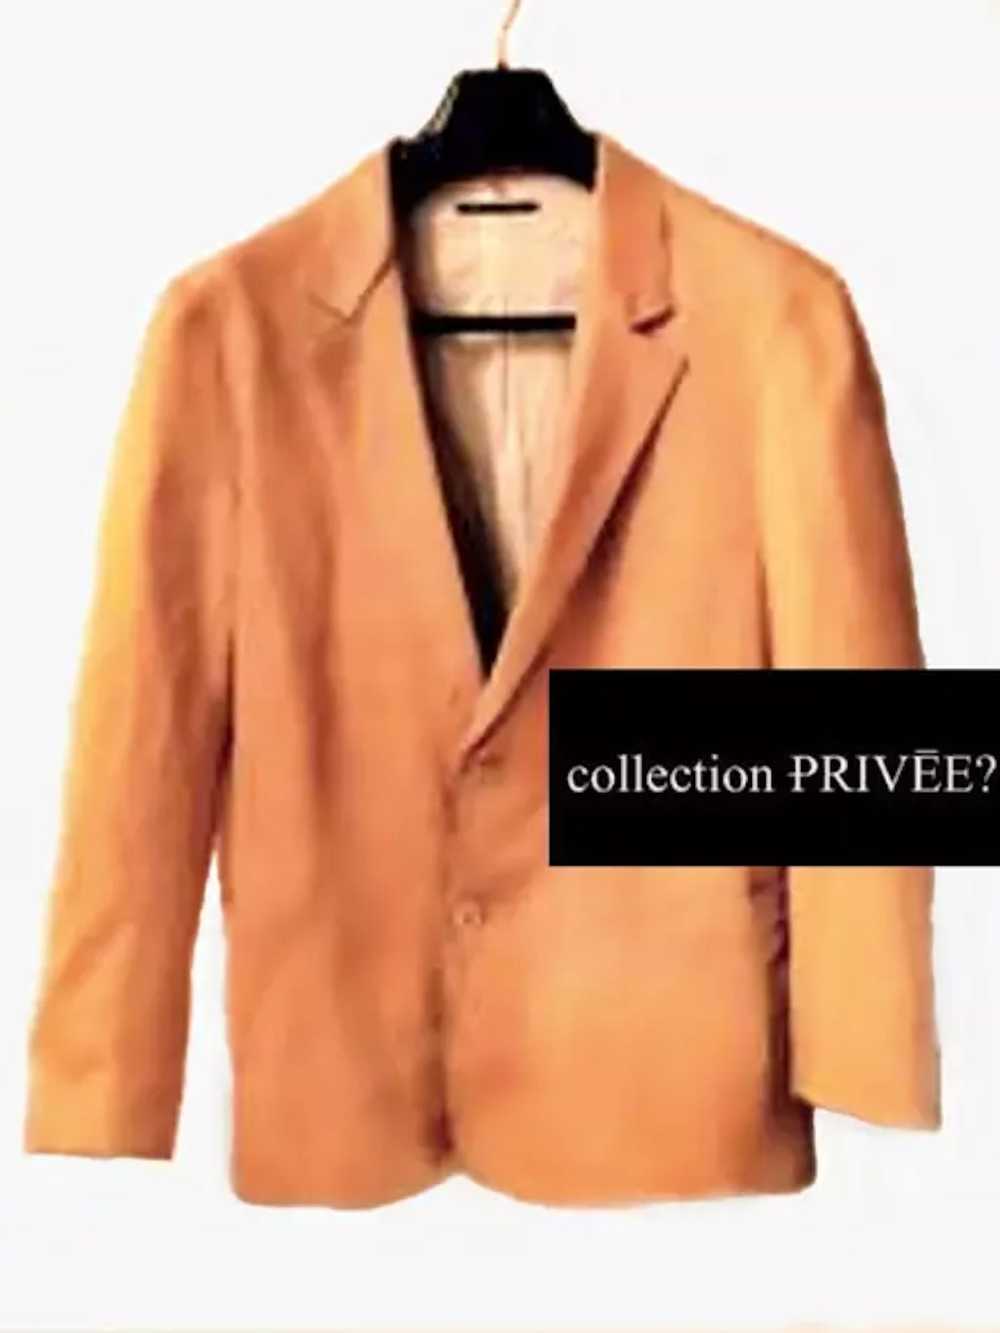 Collection Privee Tailored Leather Blazers - image 1